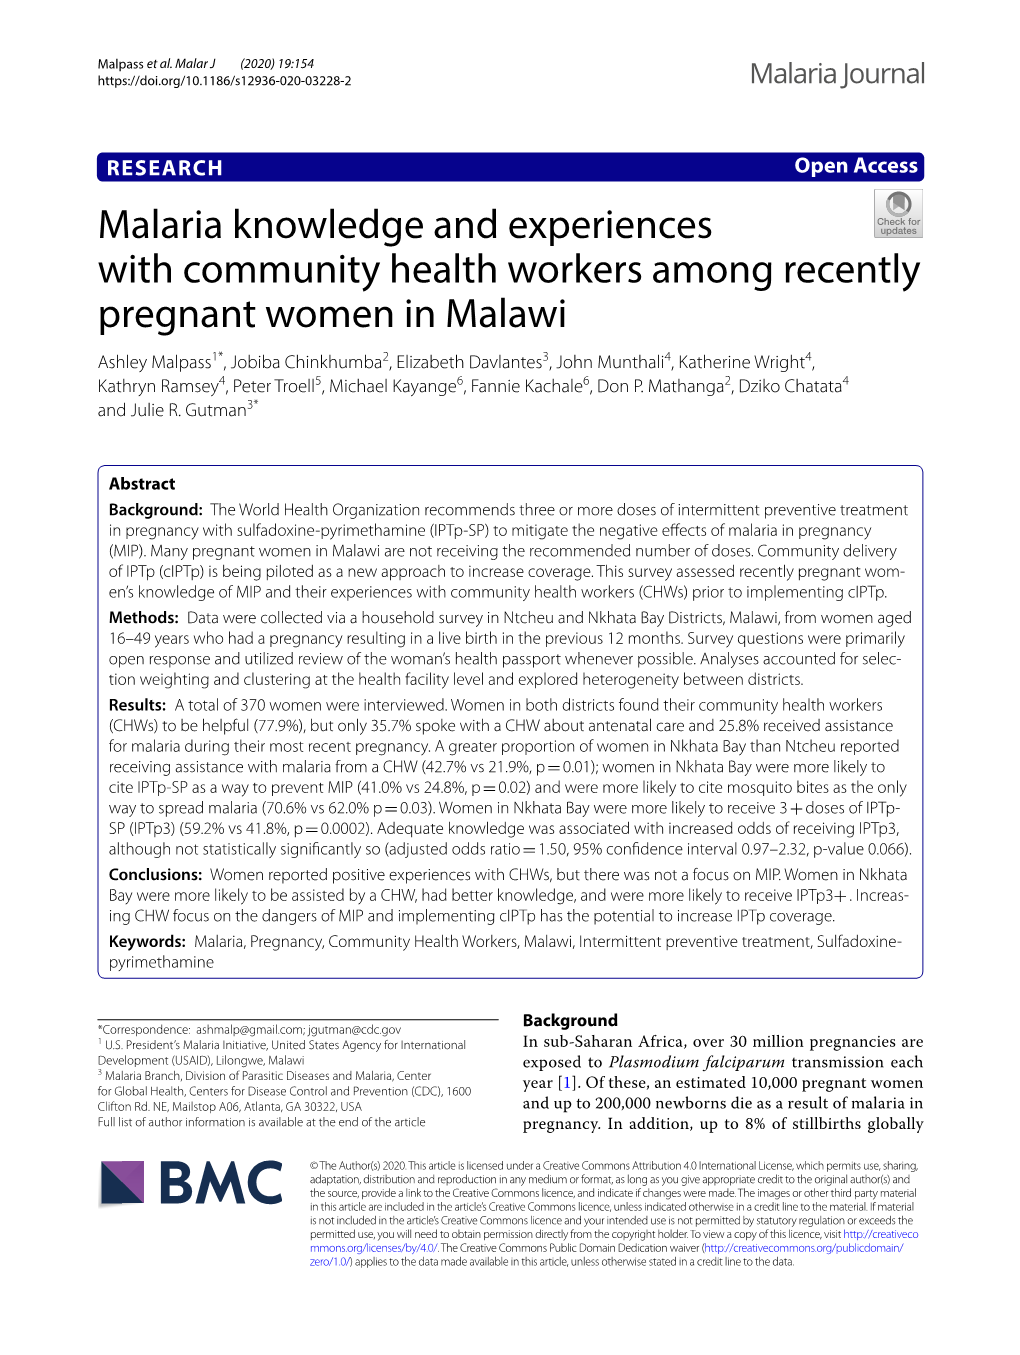 Malaria Knowledge and Experiences with Community Health Workers